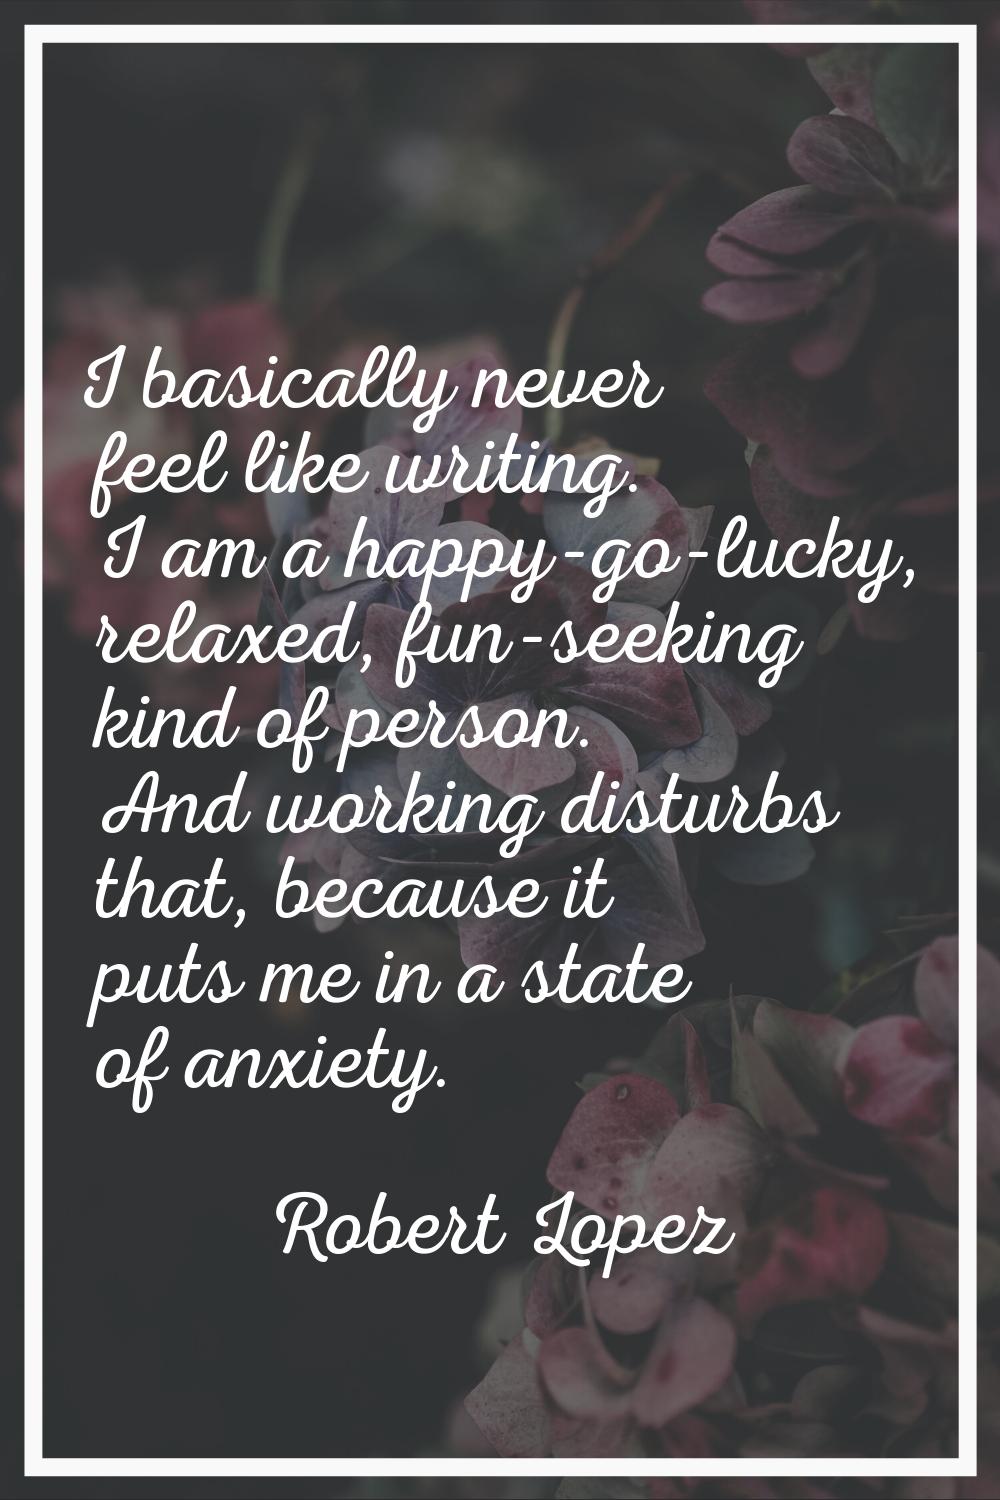 I basically never feel like writing. I am a happy-go-lucky, relaxed, fun-seeking kind of person. An